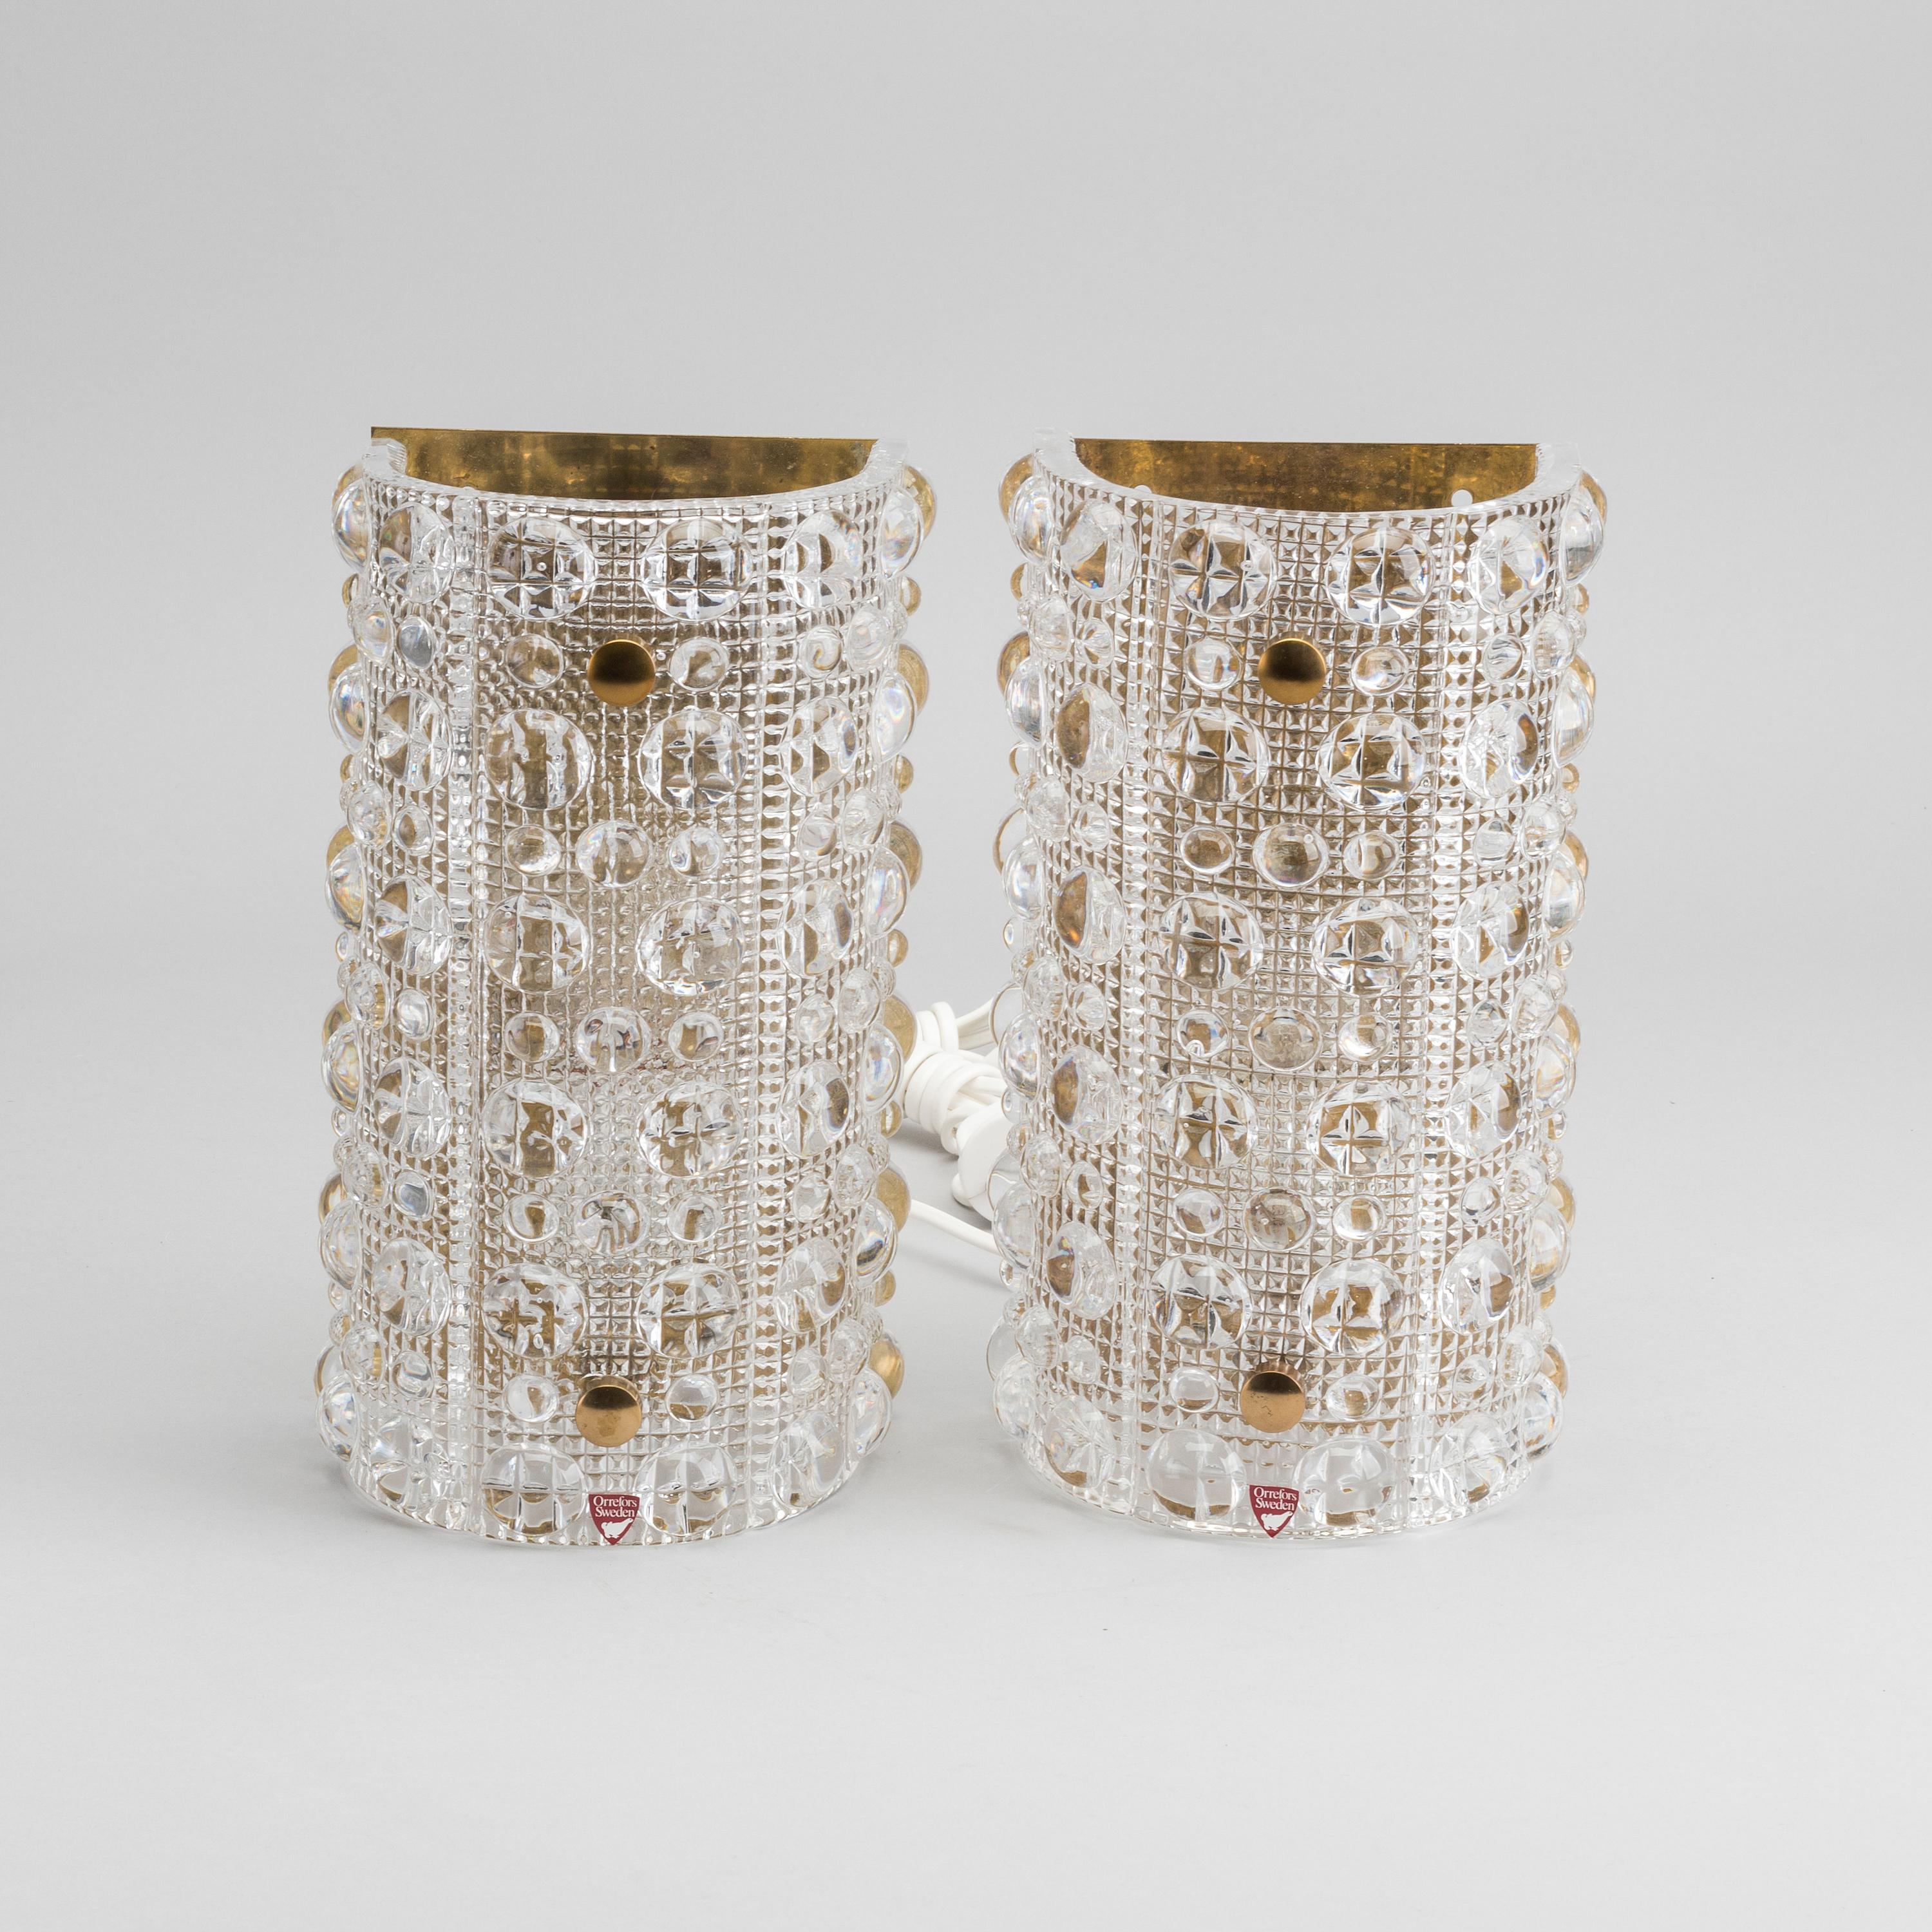 Carl Fagerlund Pair of Large Brass and Glass Wall Sconces for Swedish Orrefors In Good Condition For Sale In Madrid, ES